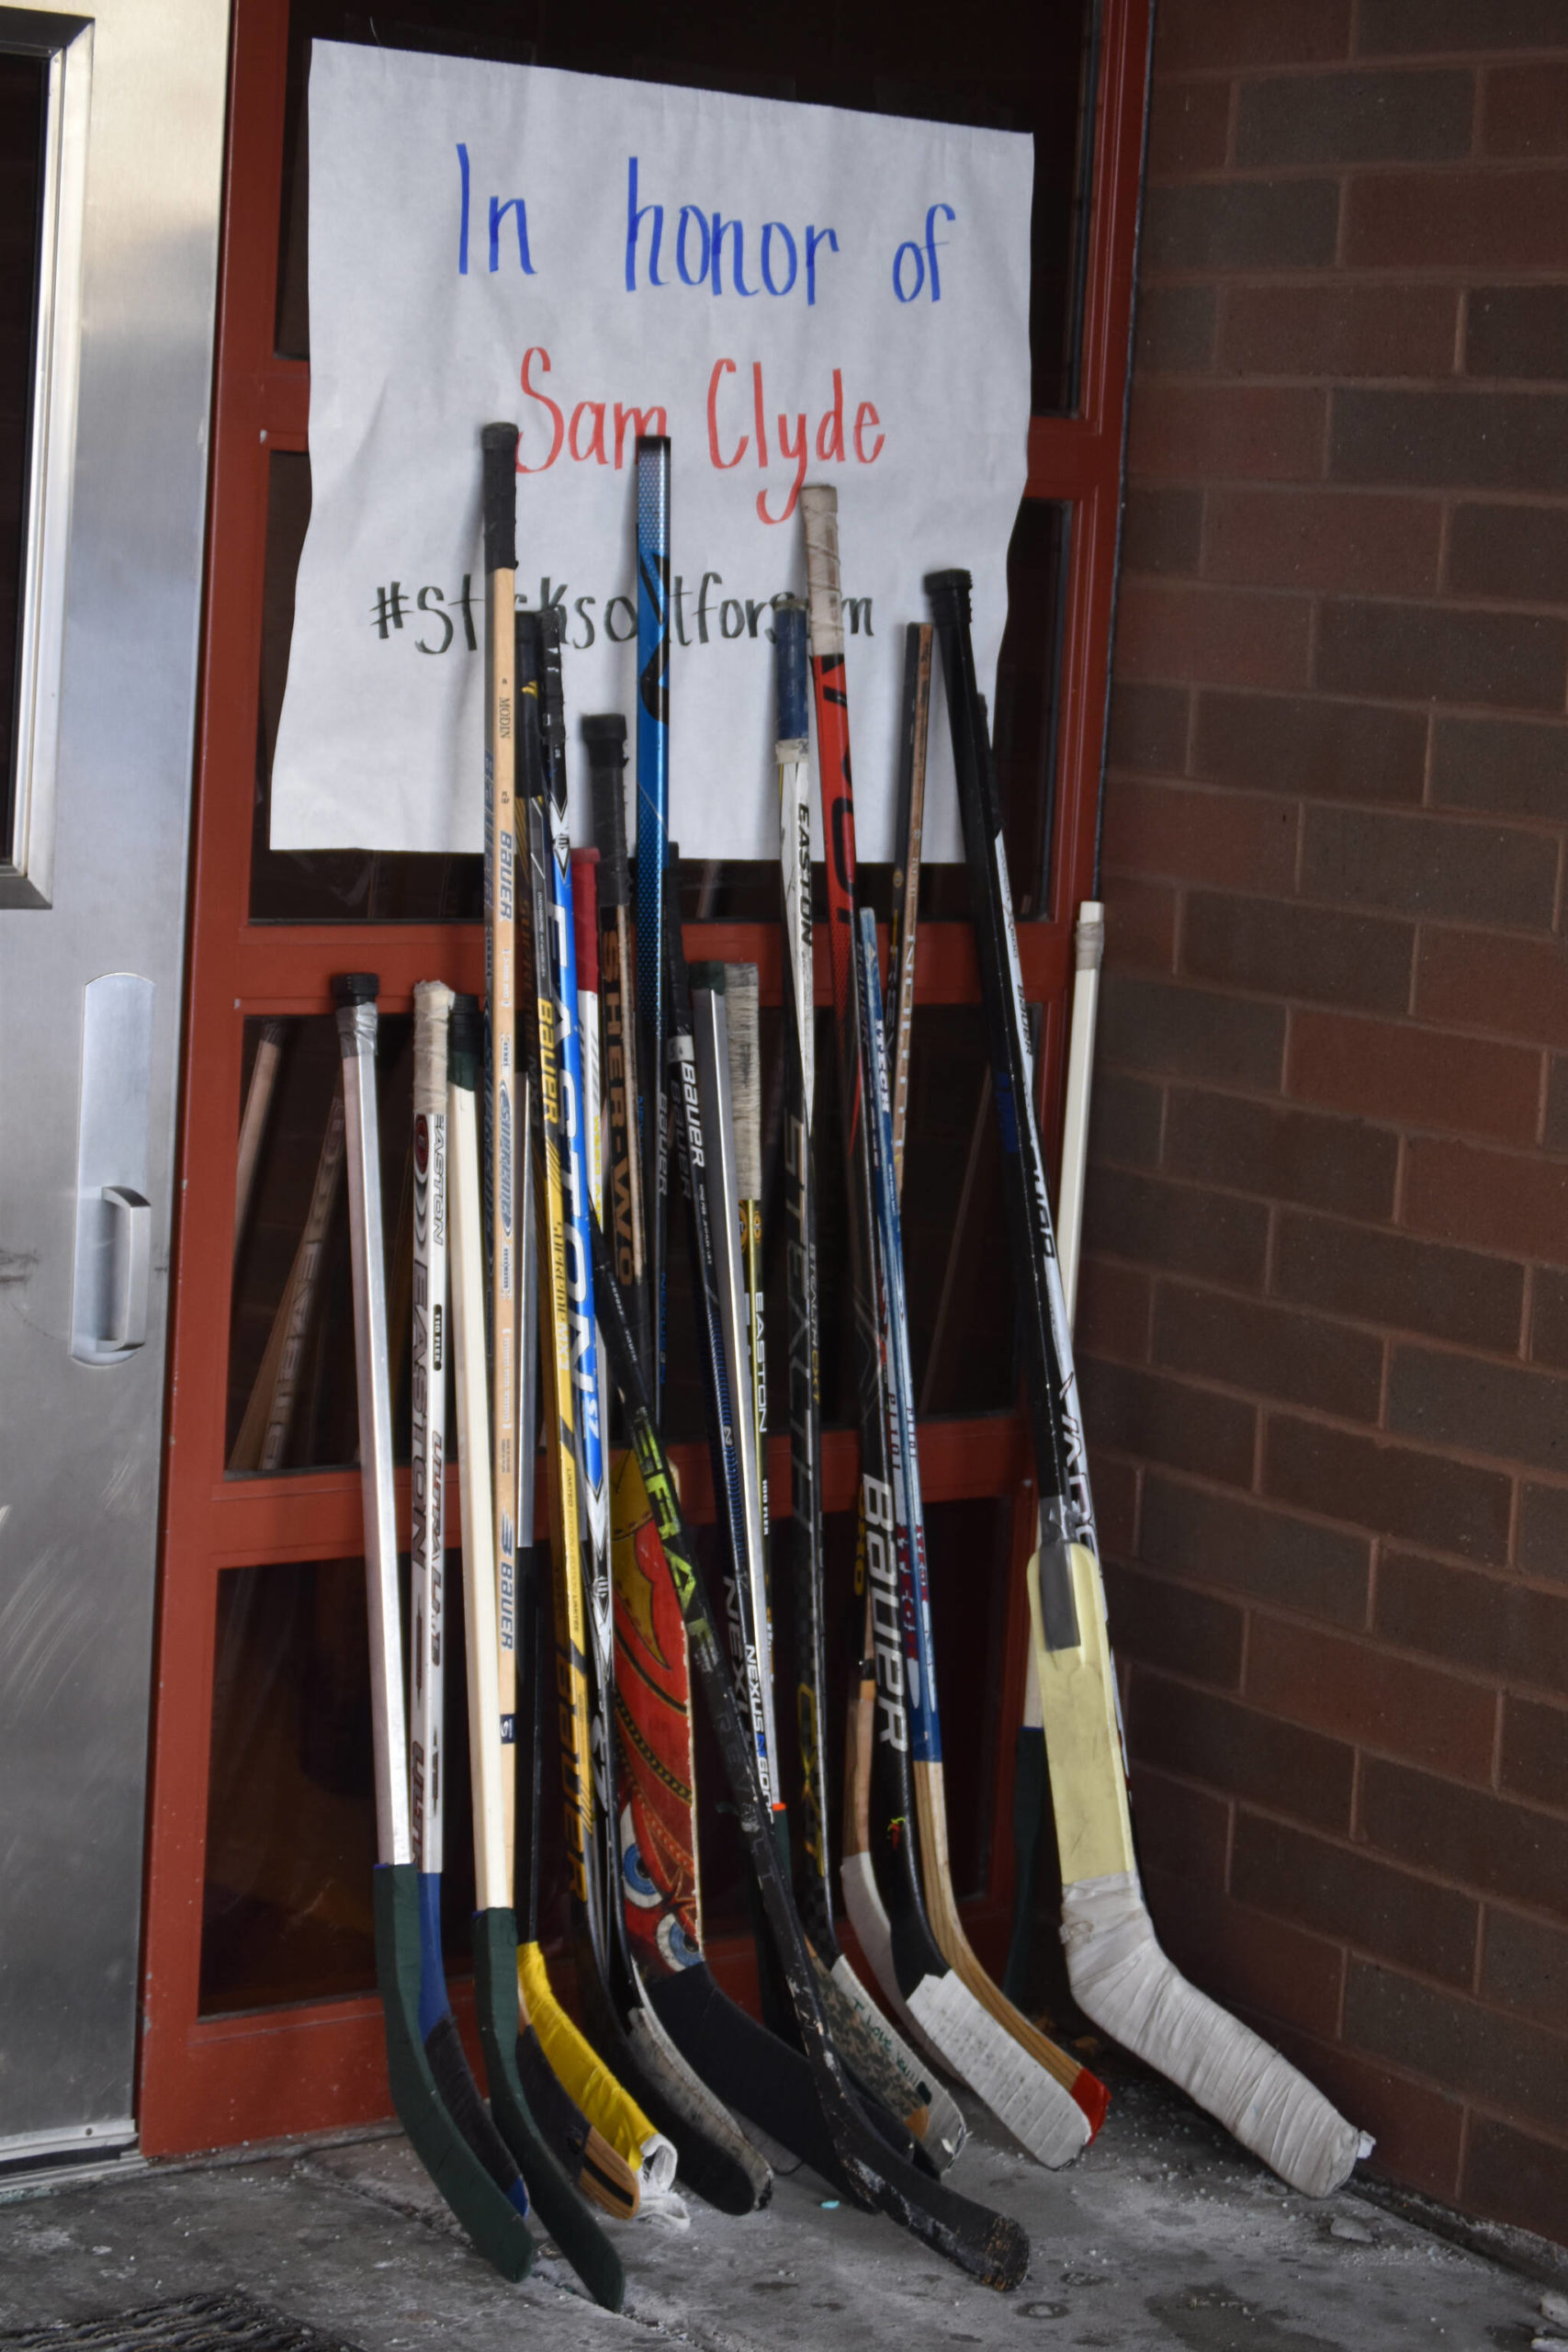 A collection of hockey sticks sit outside in honor of Sam Clyde on Friday, Dec. 16, 2022, at Skyview Middle School in Soldotna, Alaska. (Jake Dye/Peninsula Clarion)